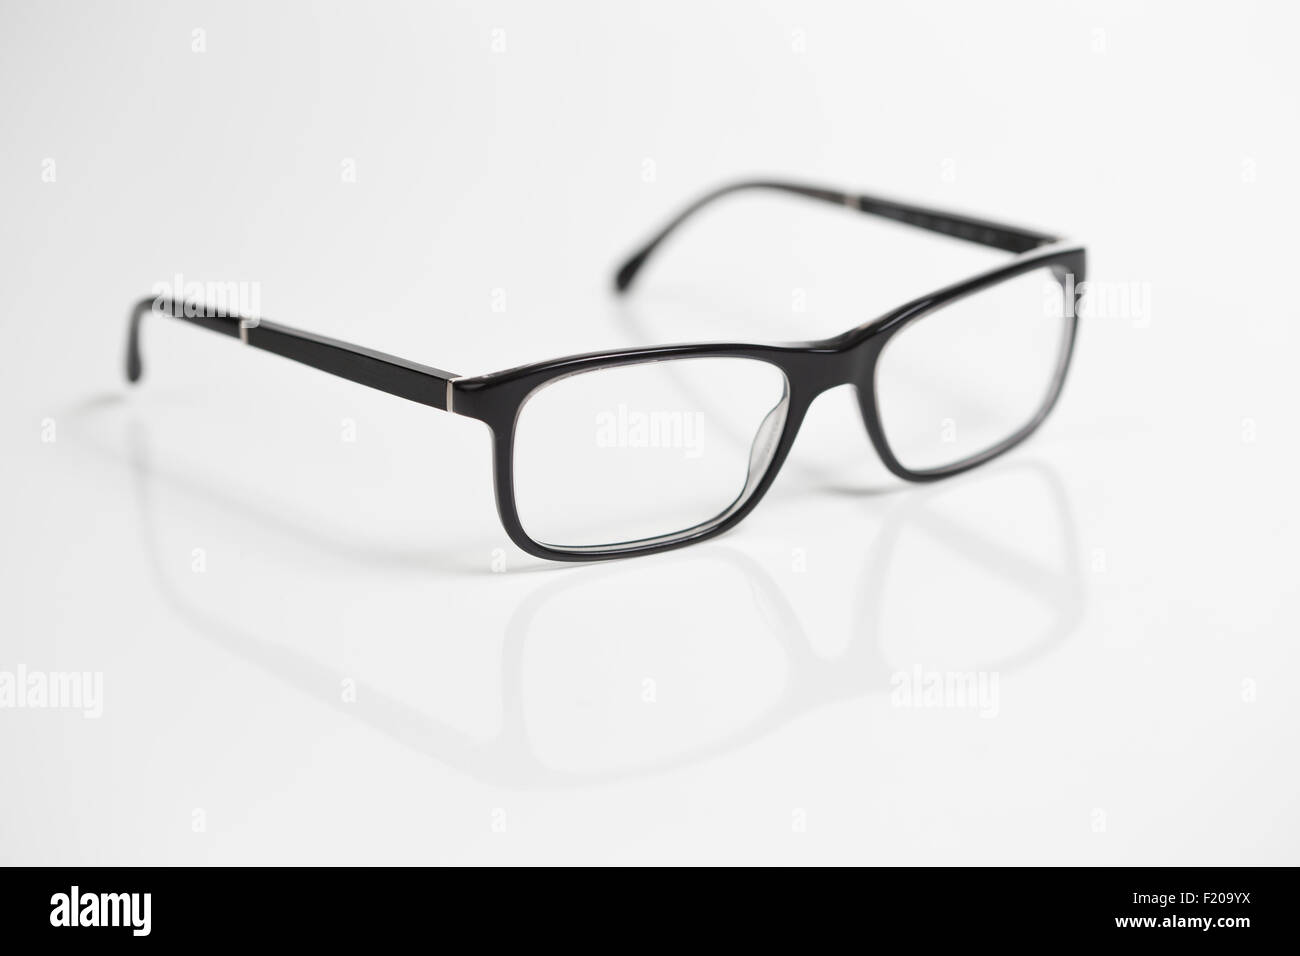 pair of spectacles Stock Photo - Alamy